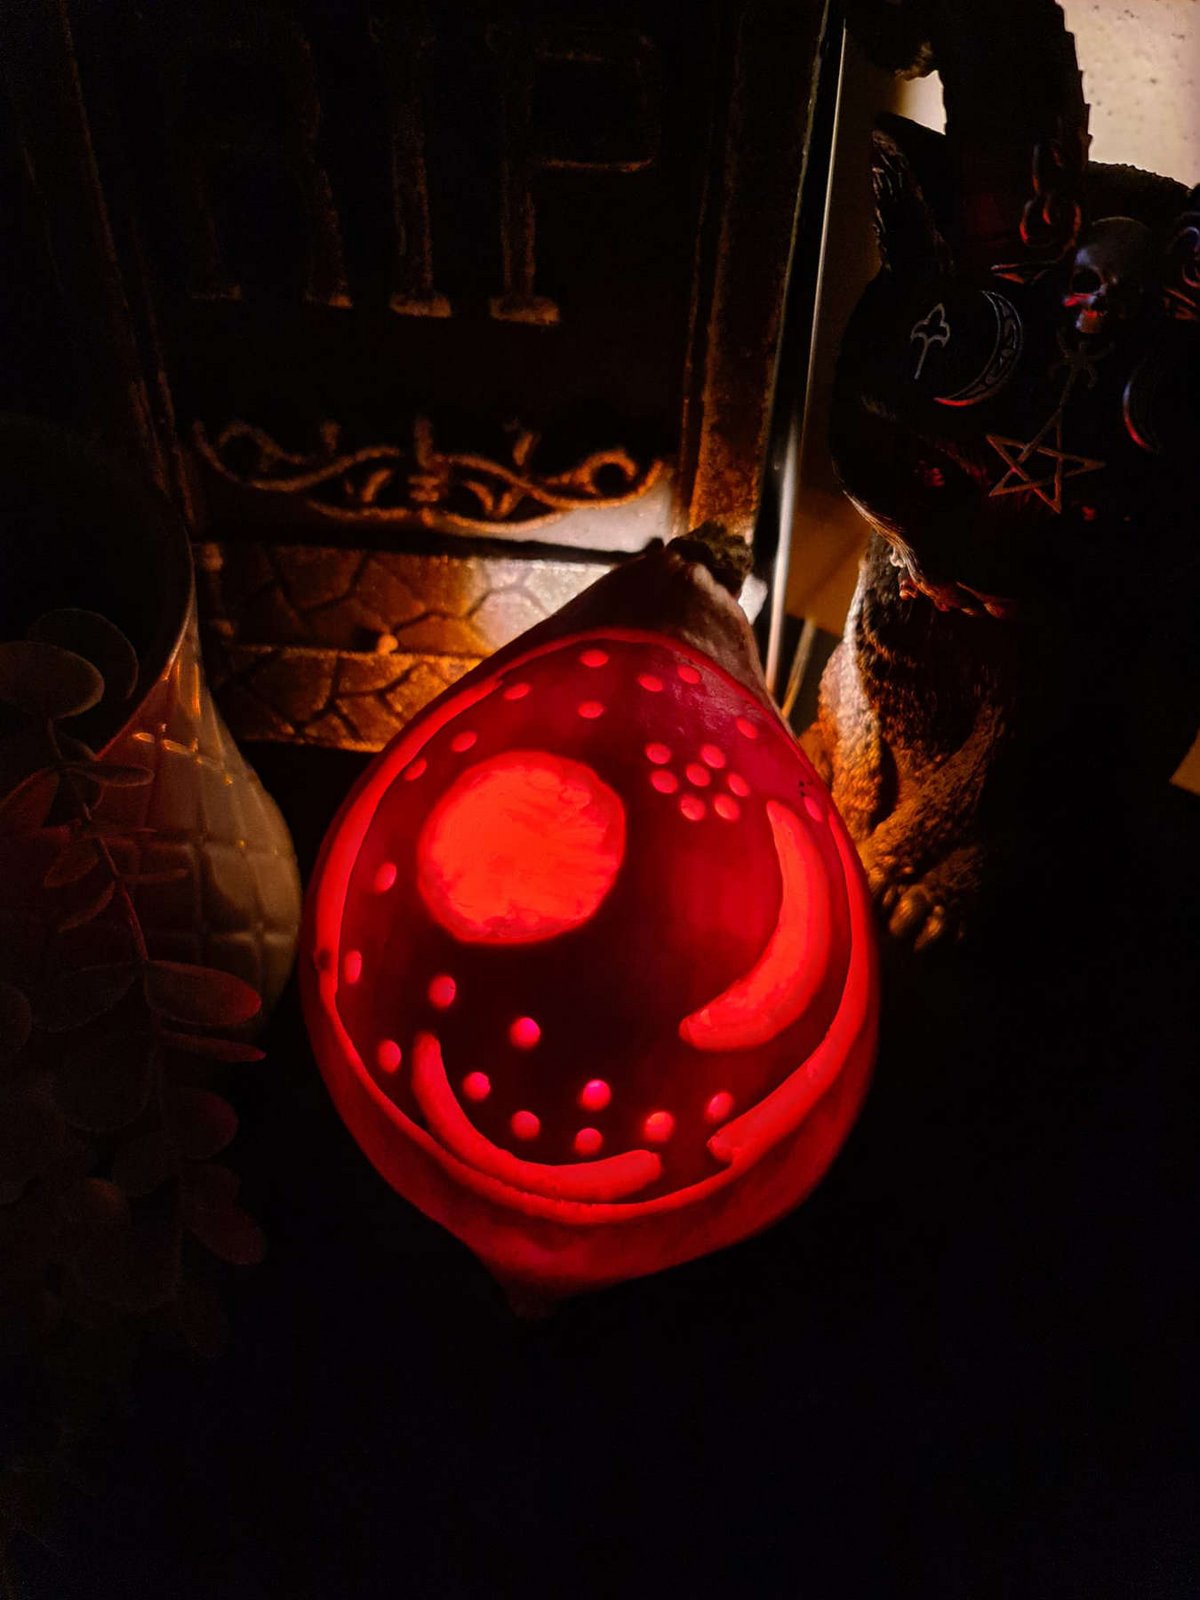 The motifs of the Sky Disc carved into a Halloween pumpkin.